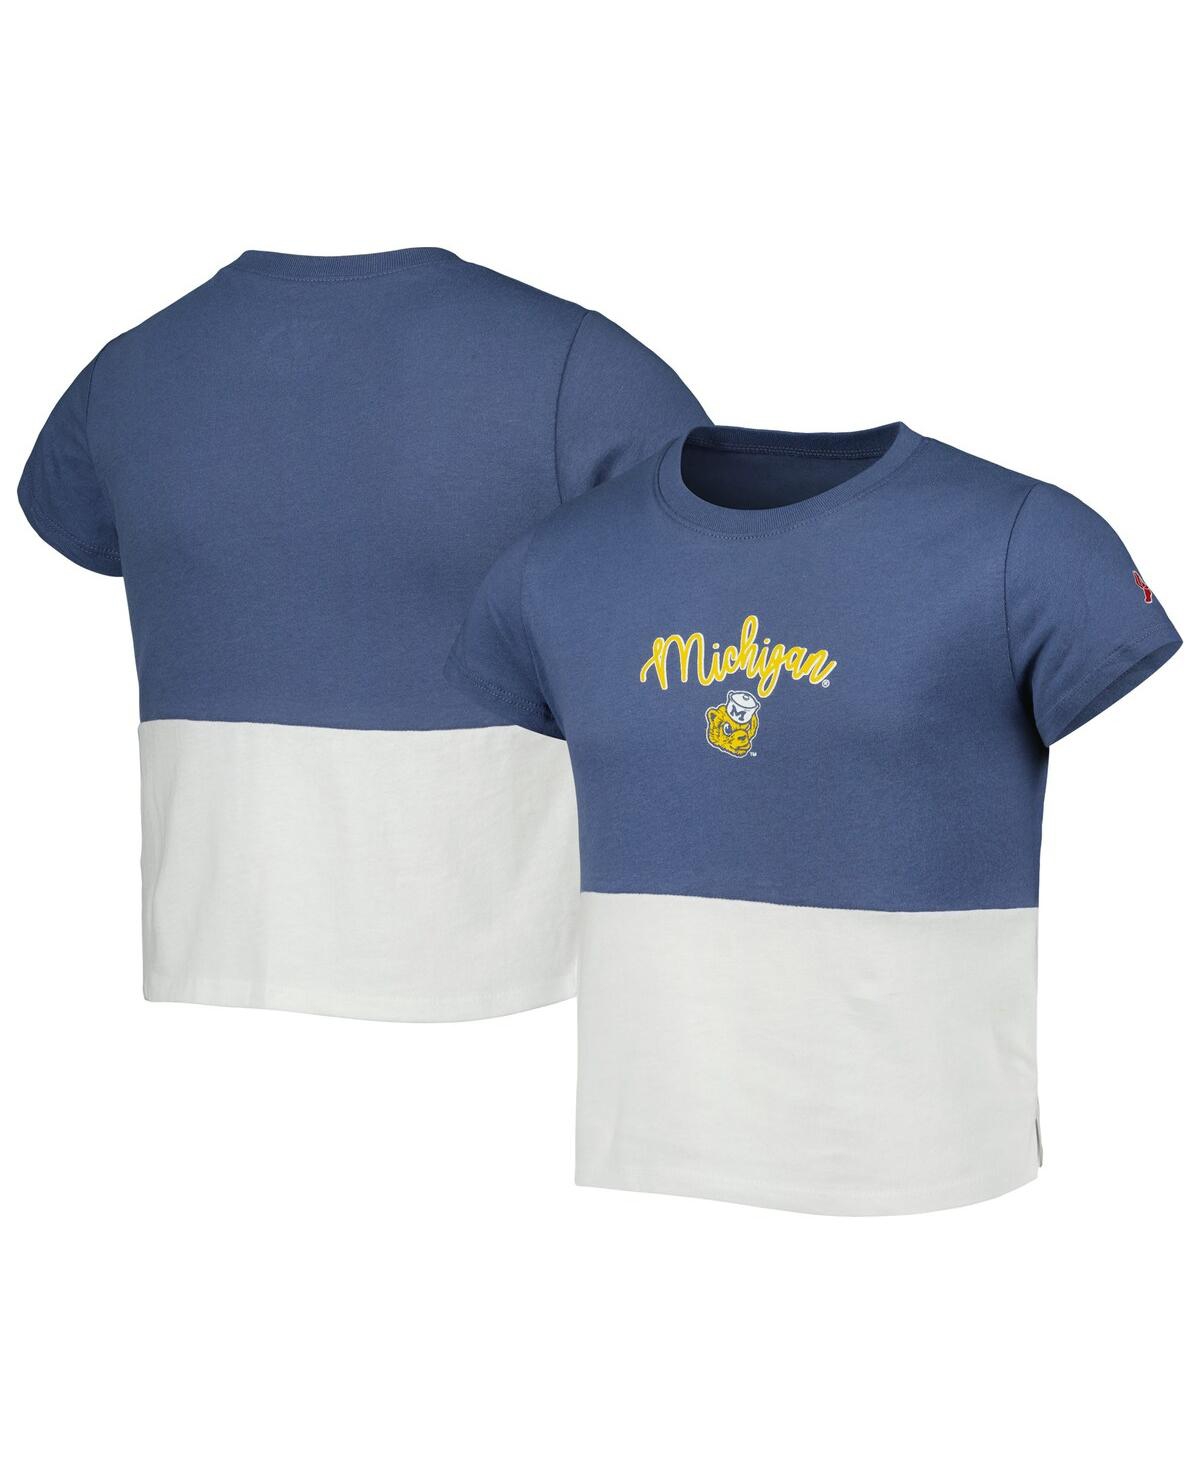 LEAGUE COLLEGIATE WEAR YOUTH GIRLS LEAGUE COLLEGIATE WEAR NAVY, WHITE MICHIGAN WOLVERINES COLORBLOCKED T-SHIRT